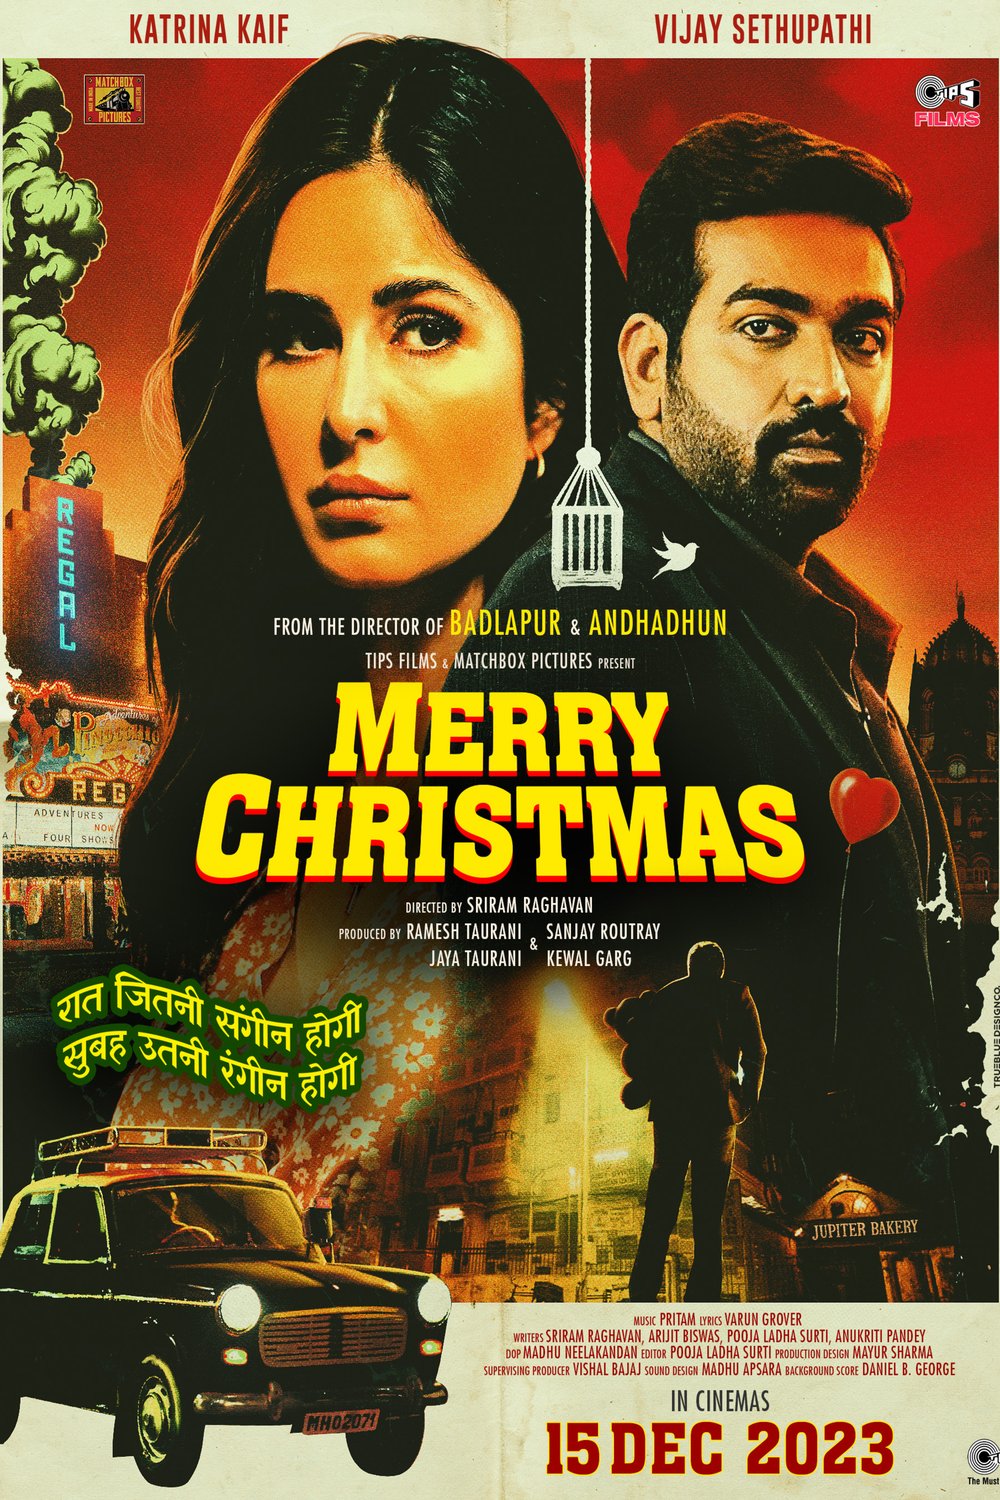 Hindi poster of the movie Merry Christmas